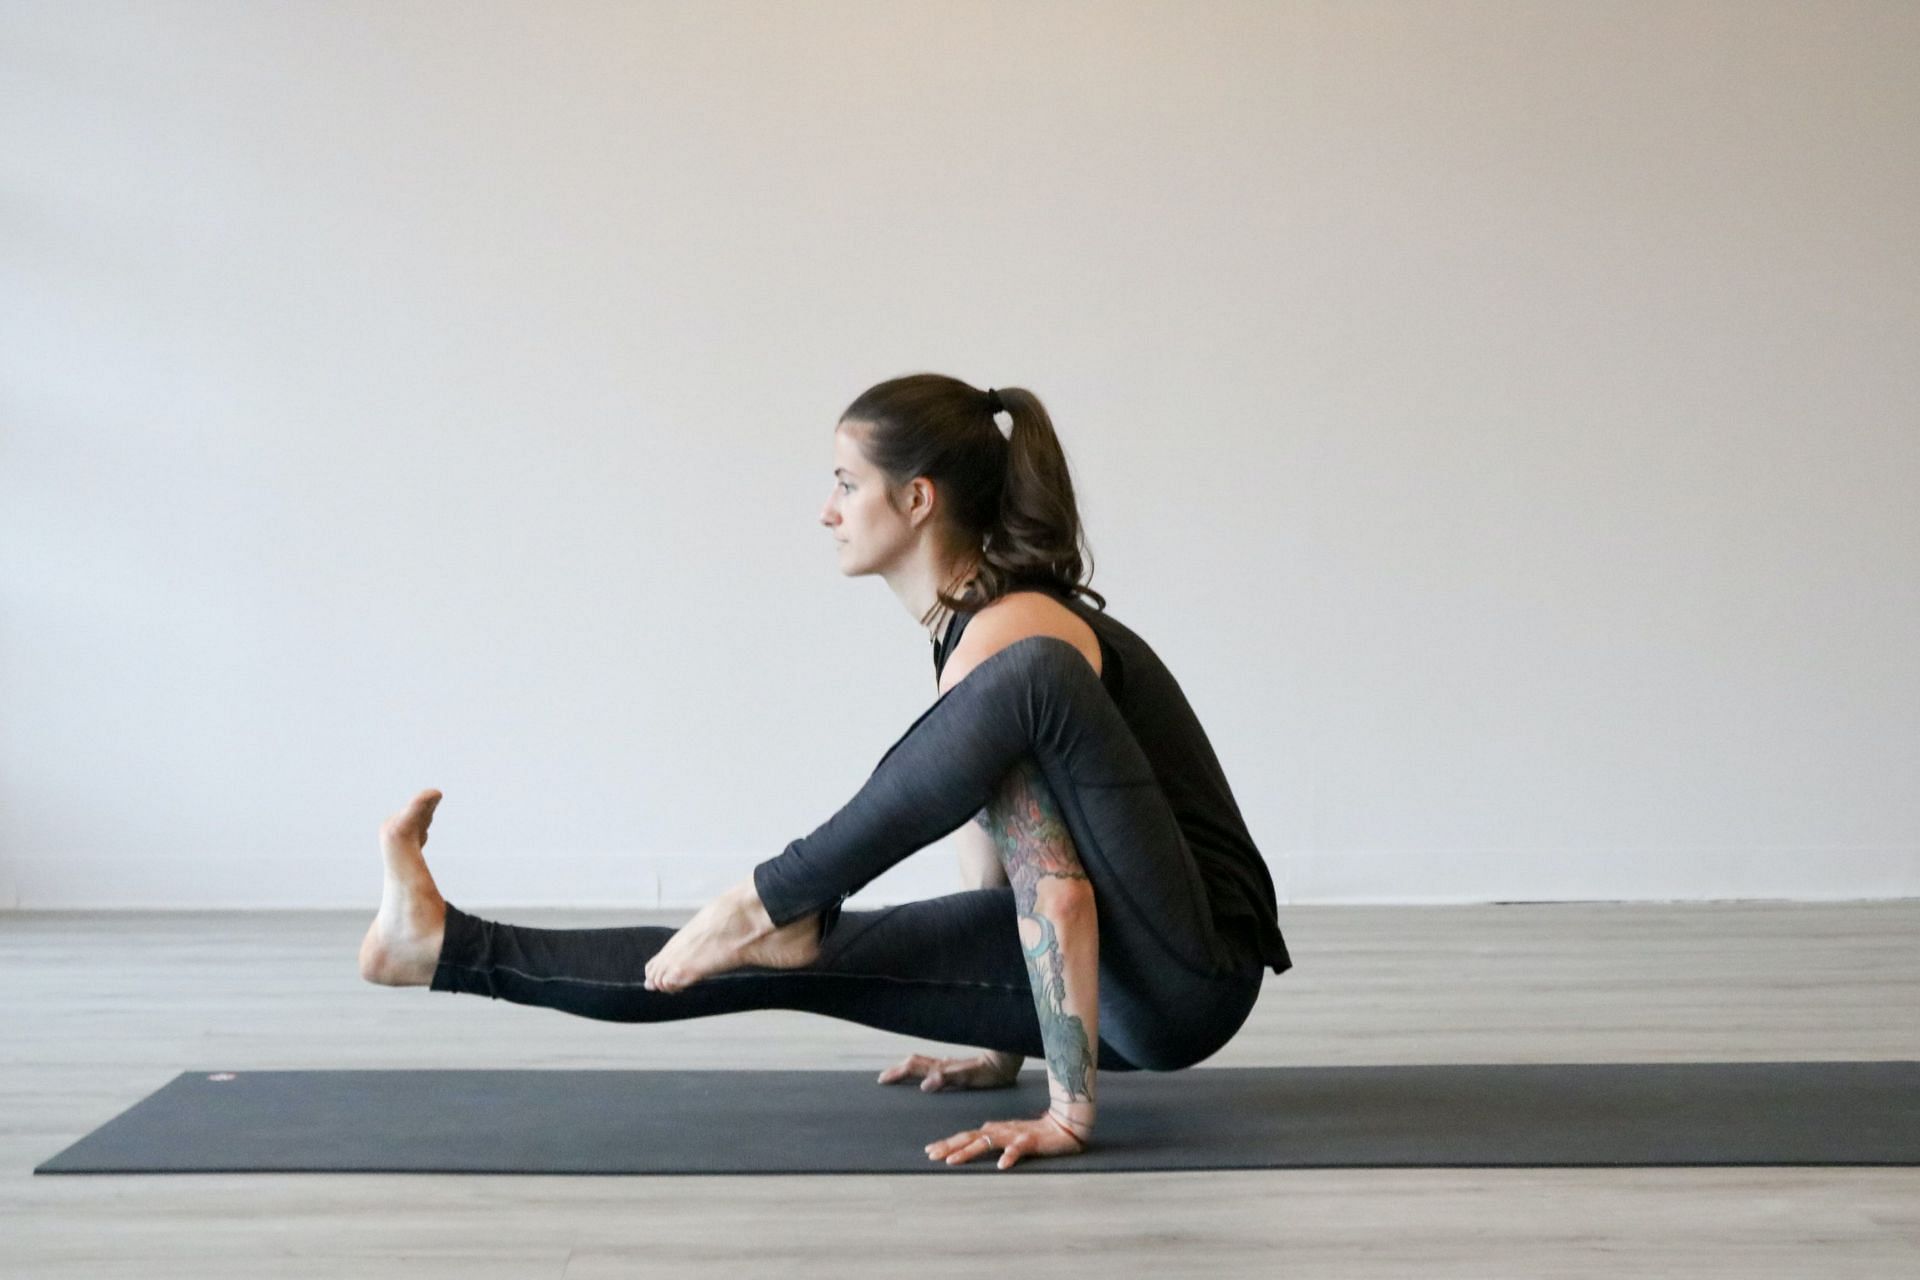 Ever wondered why people lift their heels during yoga? Here